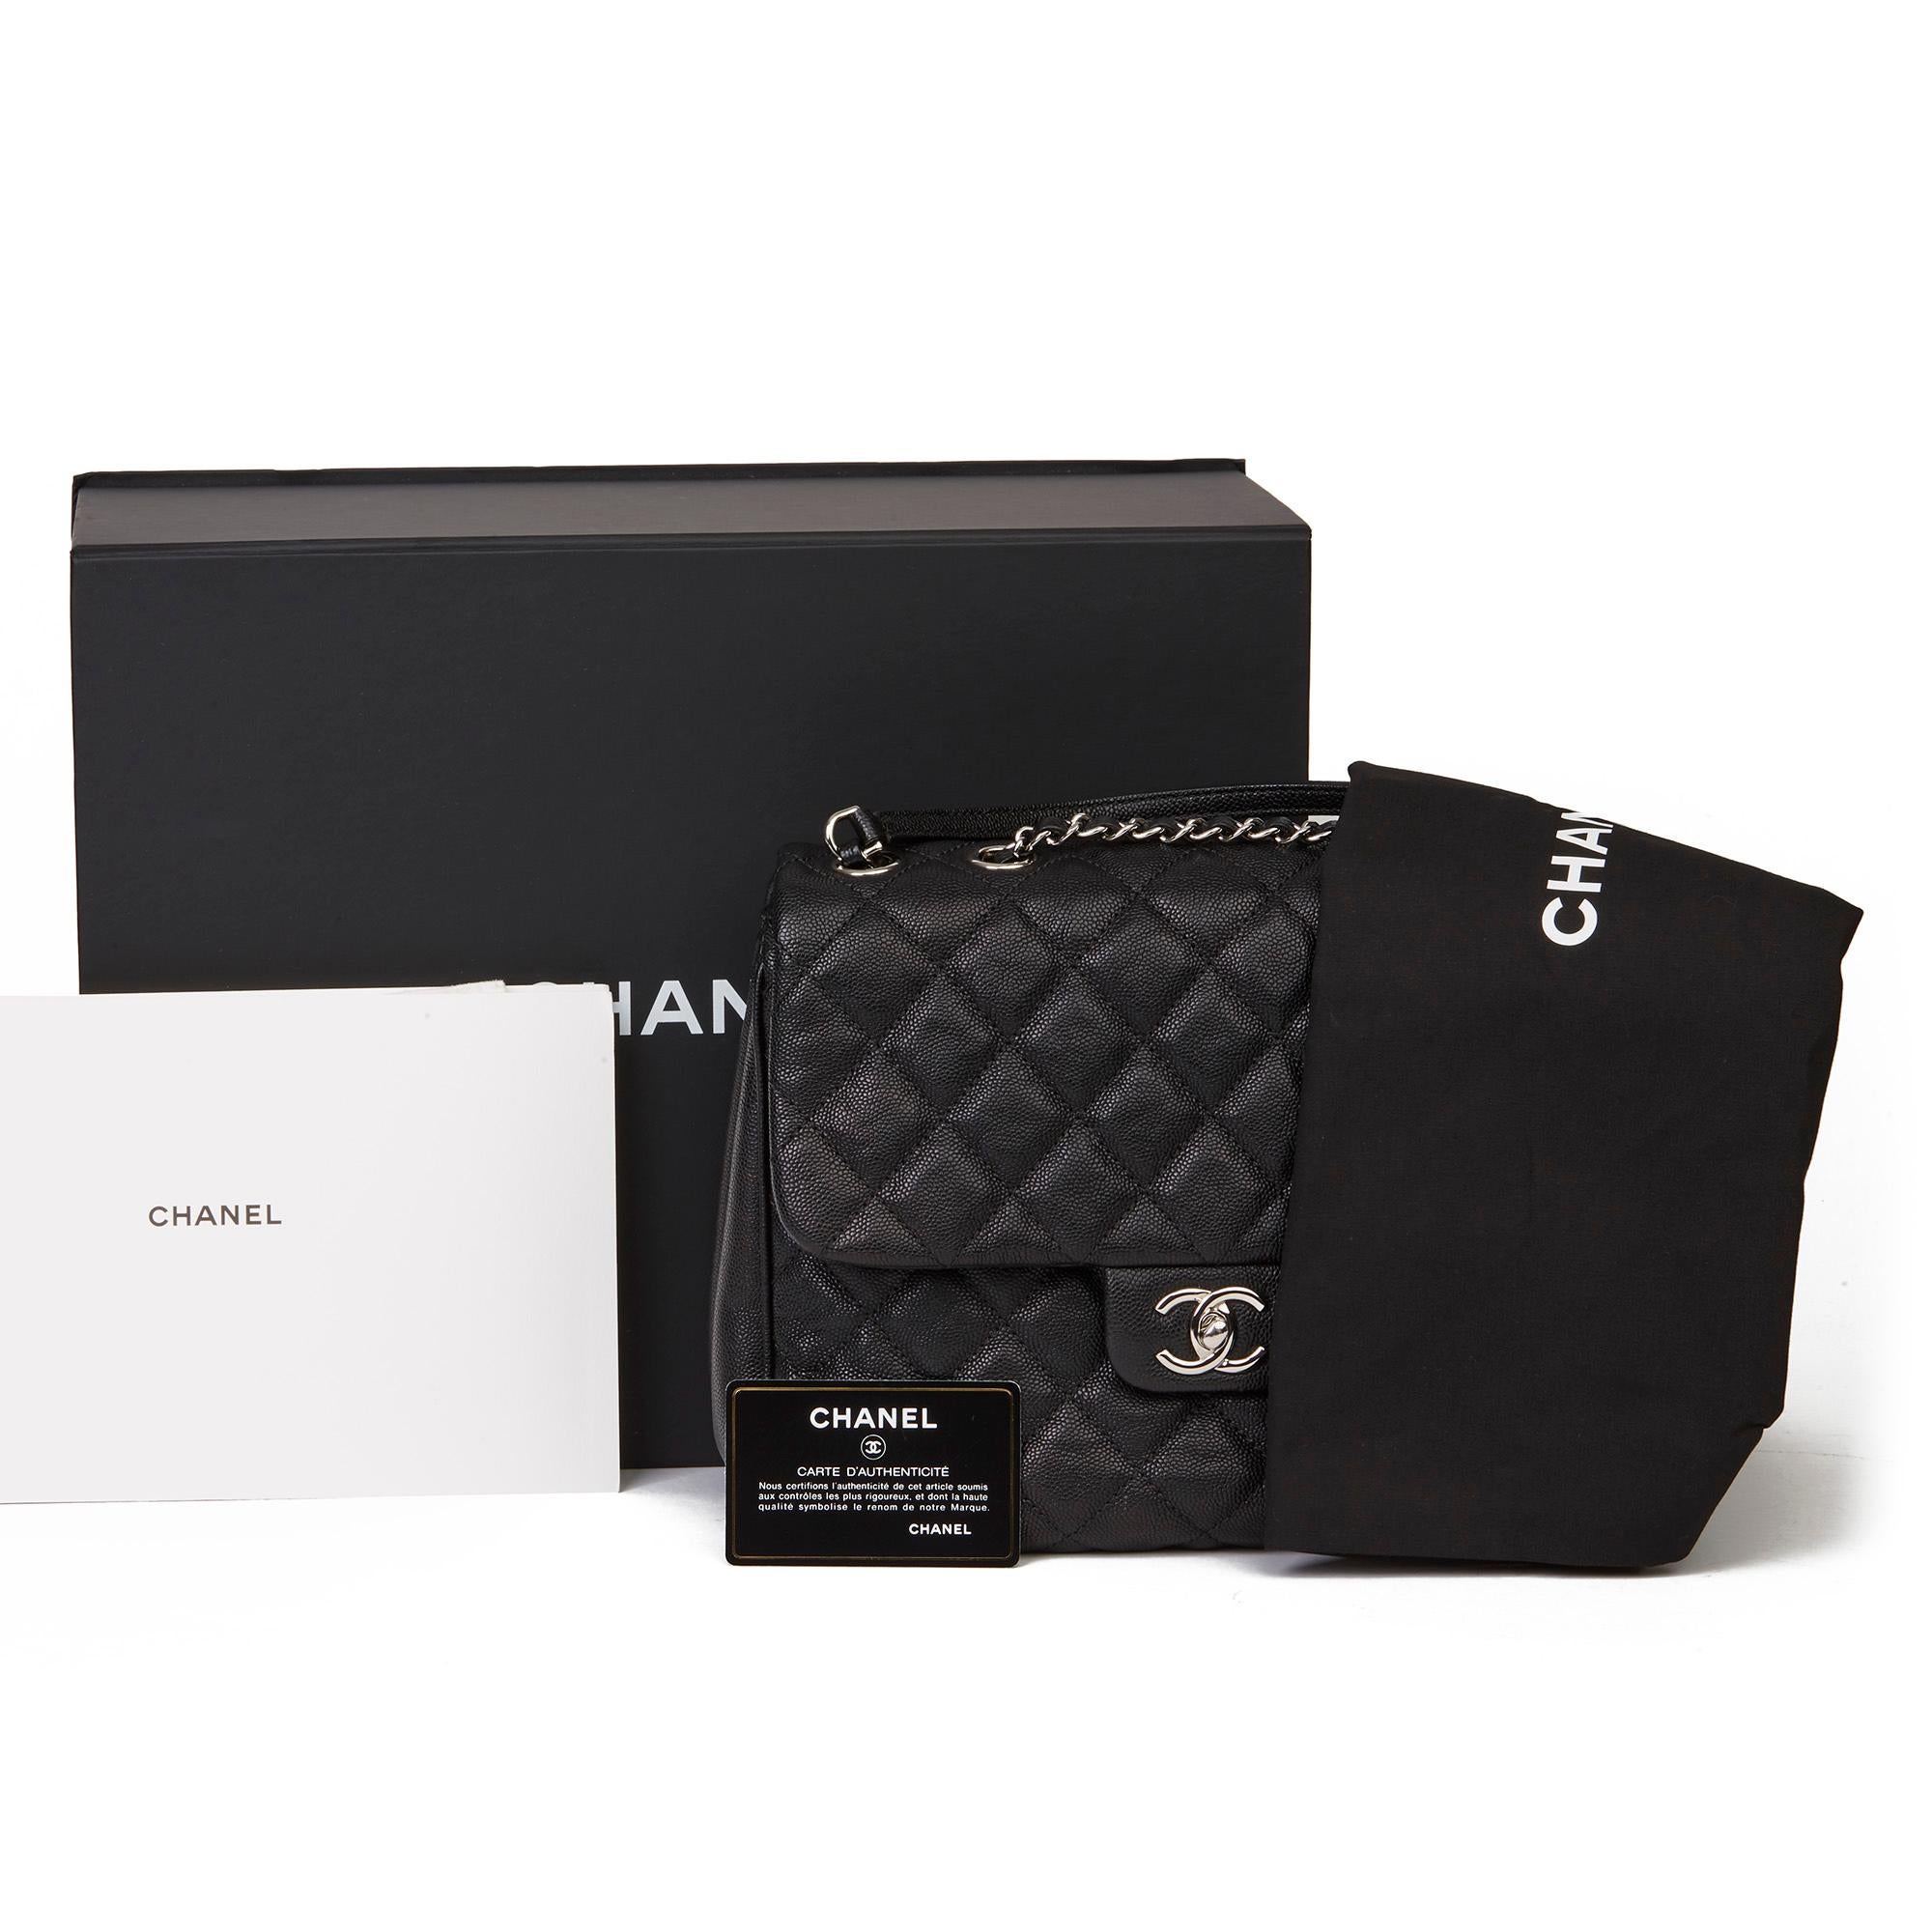 2019 Chanel Black Quilted Caviar Leather Urban Companion Flap Bag   7